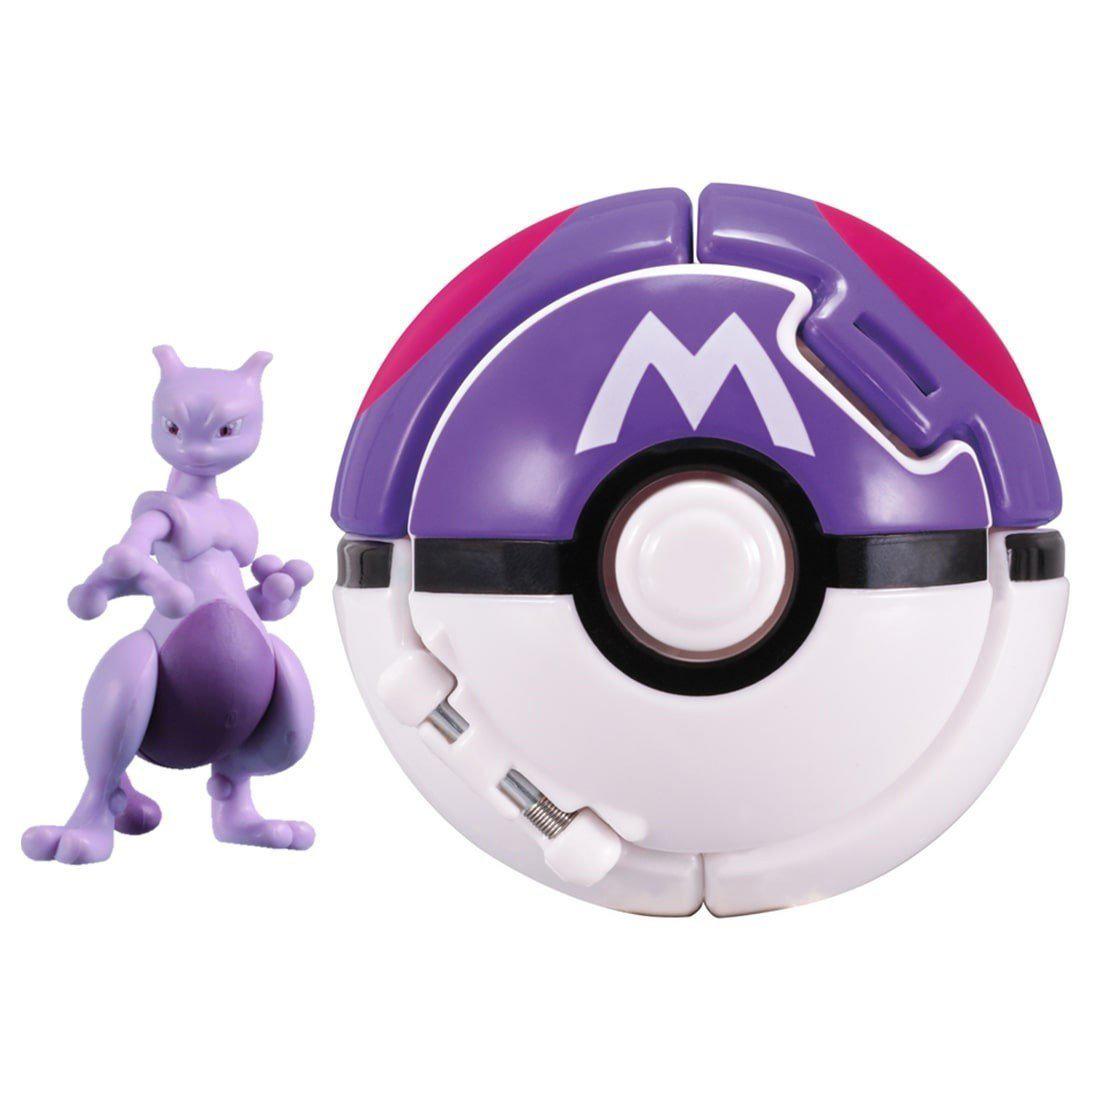 Pokemon Moncolle Monster Collection Pokedel-Z Big Mewtwo-Takara Tomy-Ace Cards &amp; Collectibles